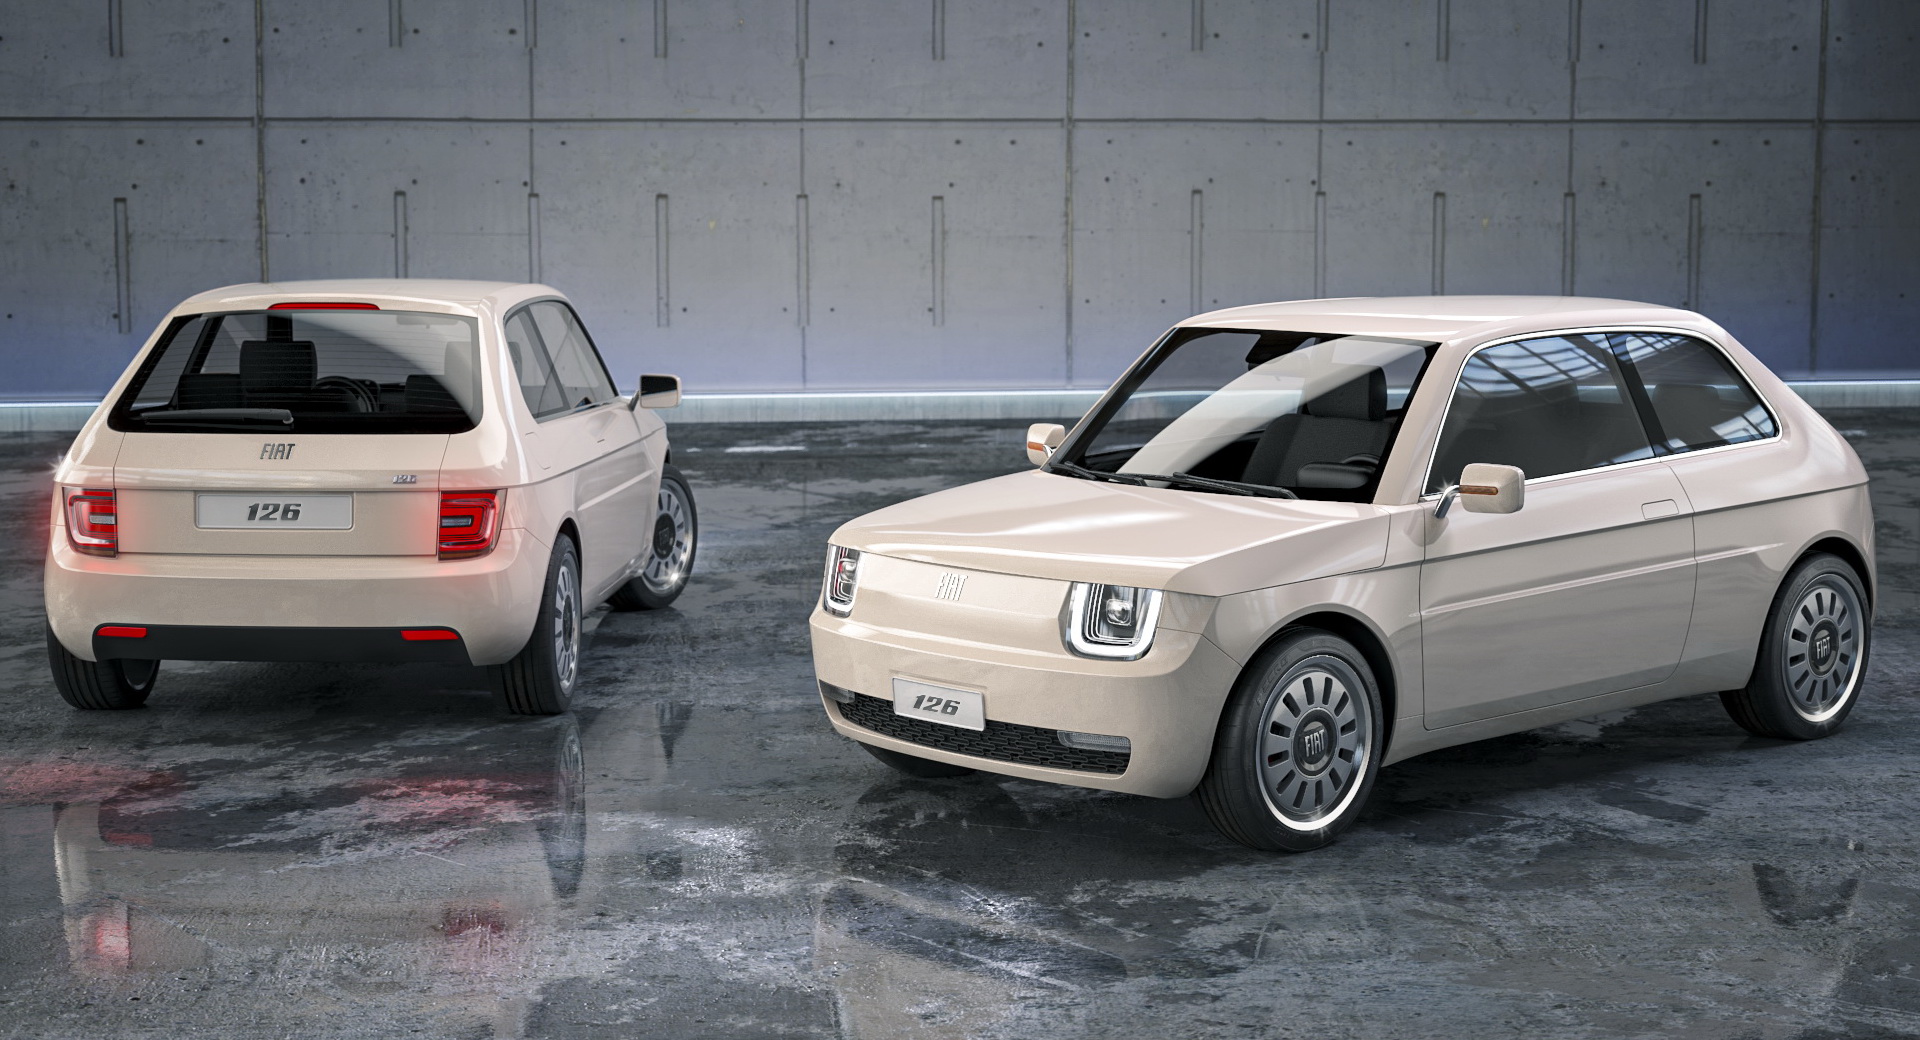 Reviving The Fiat 126 As A Modern Electric City Car Is Pure Eye